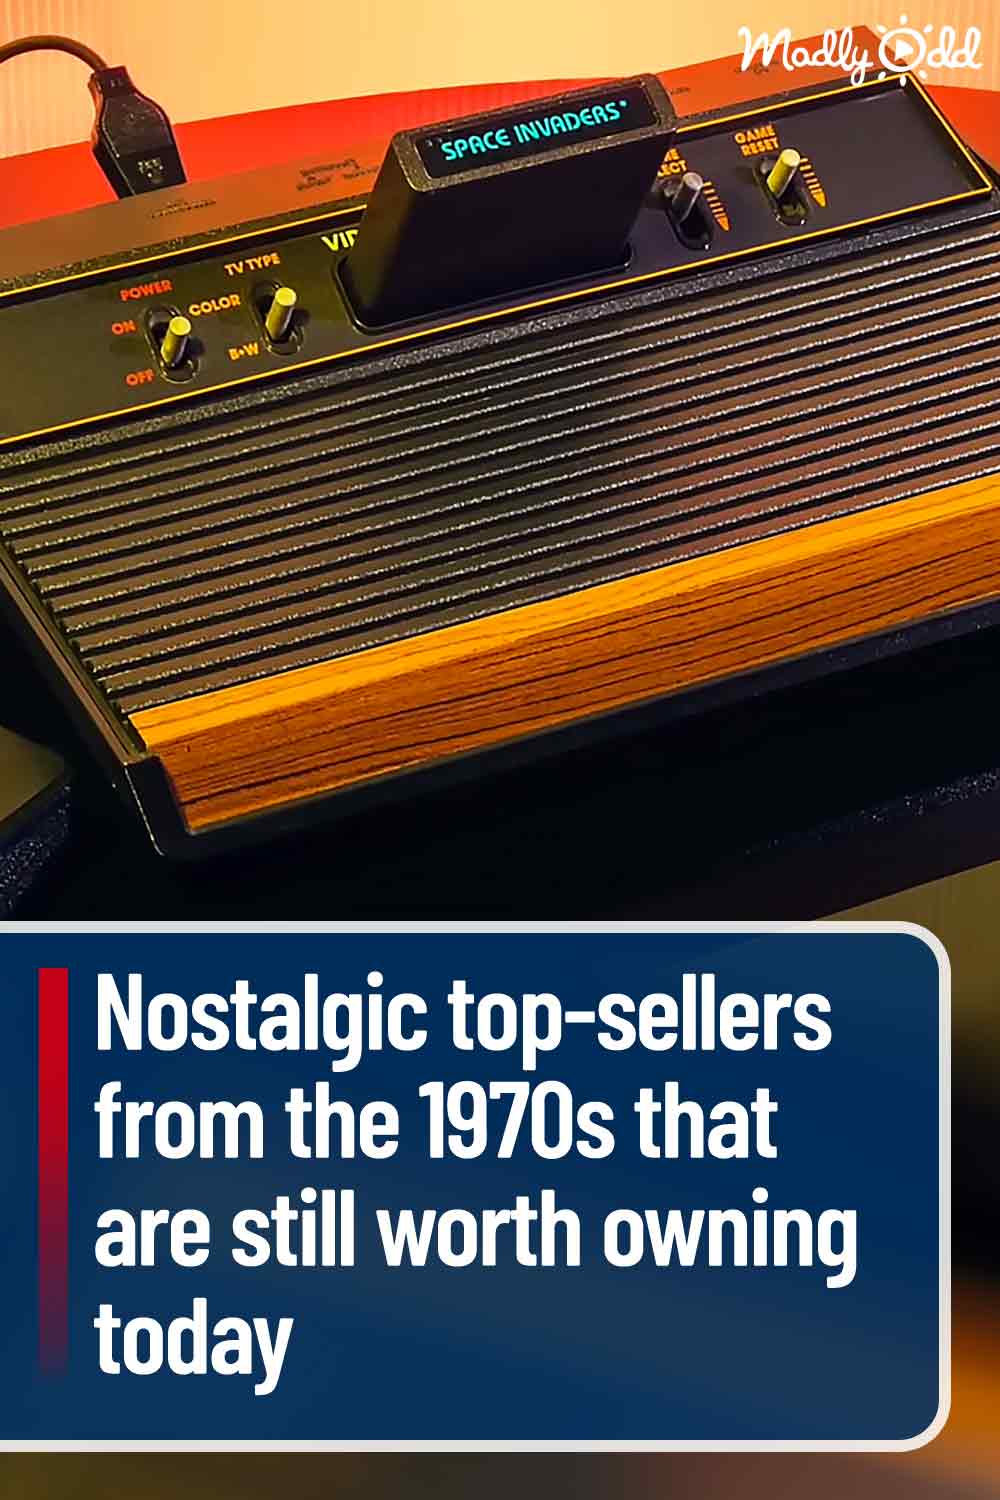 Nostalgic top-sellers from the 1970s that are still worth owning today